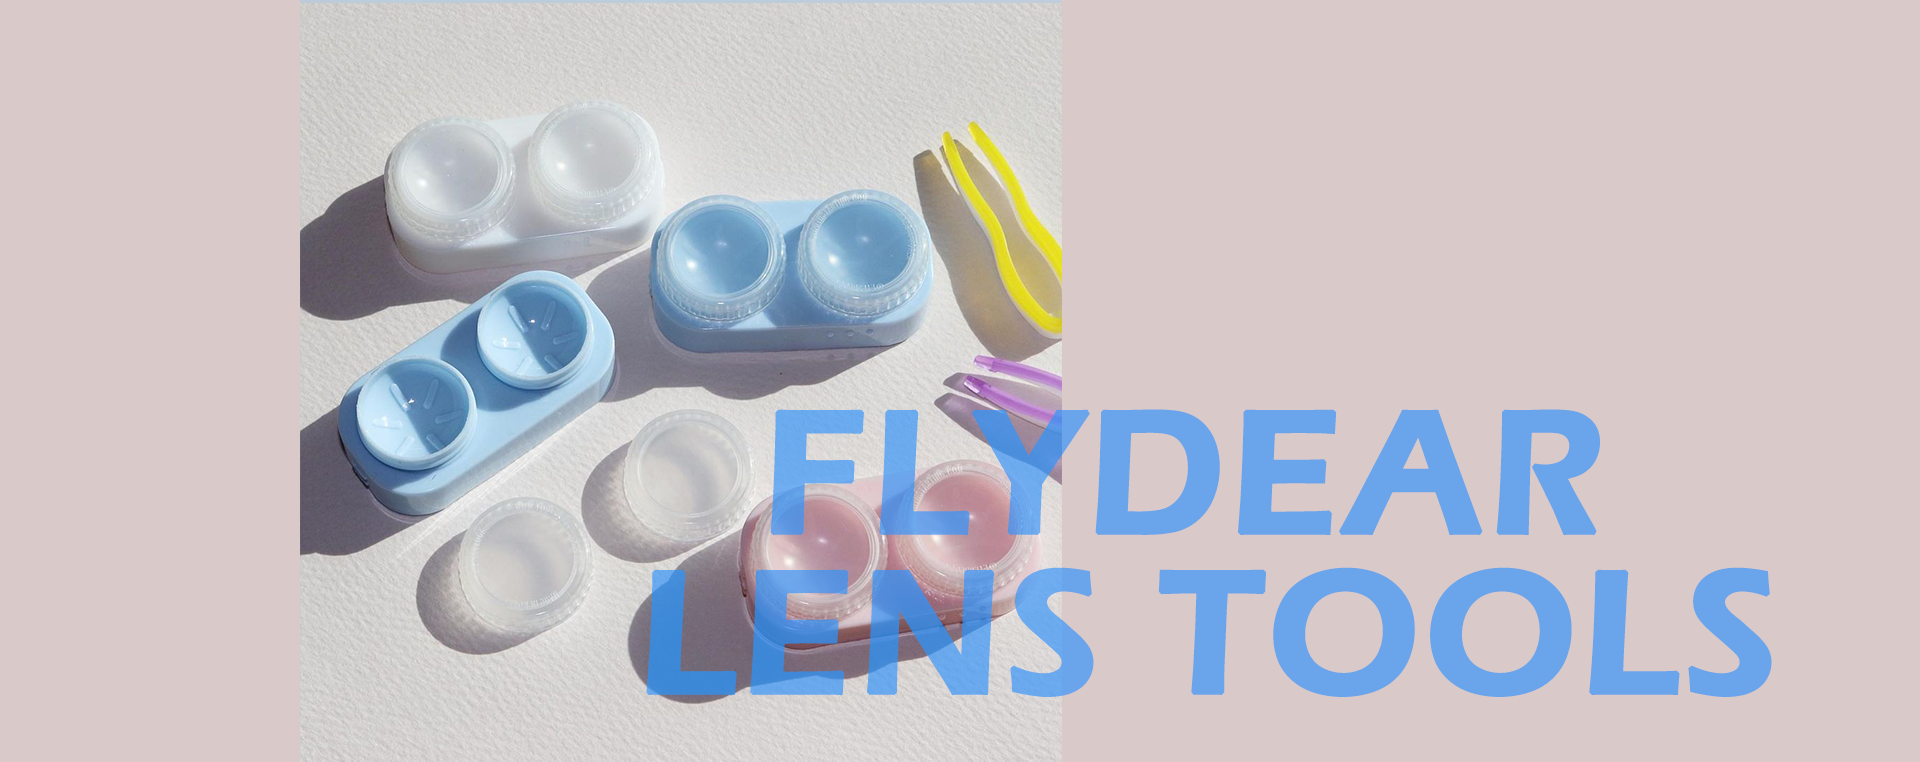 FlyDear Colored Contacts Lens Tools